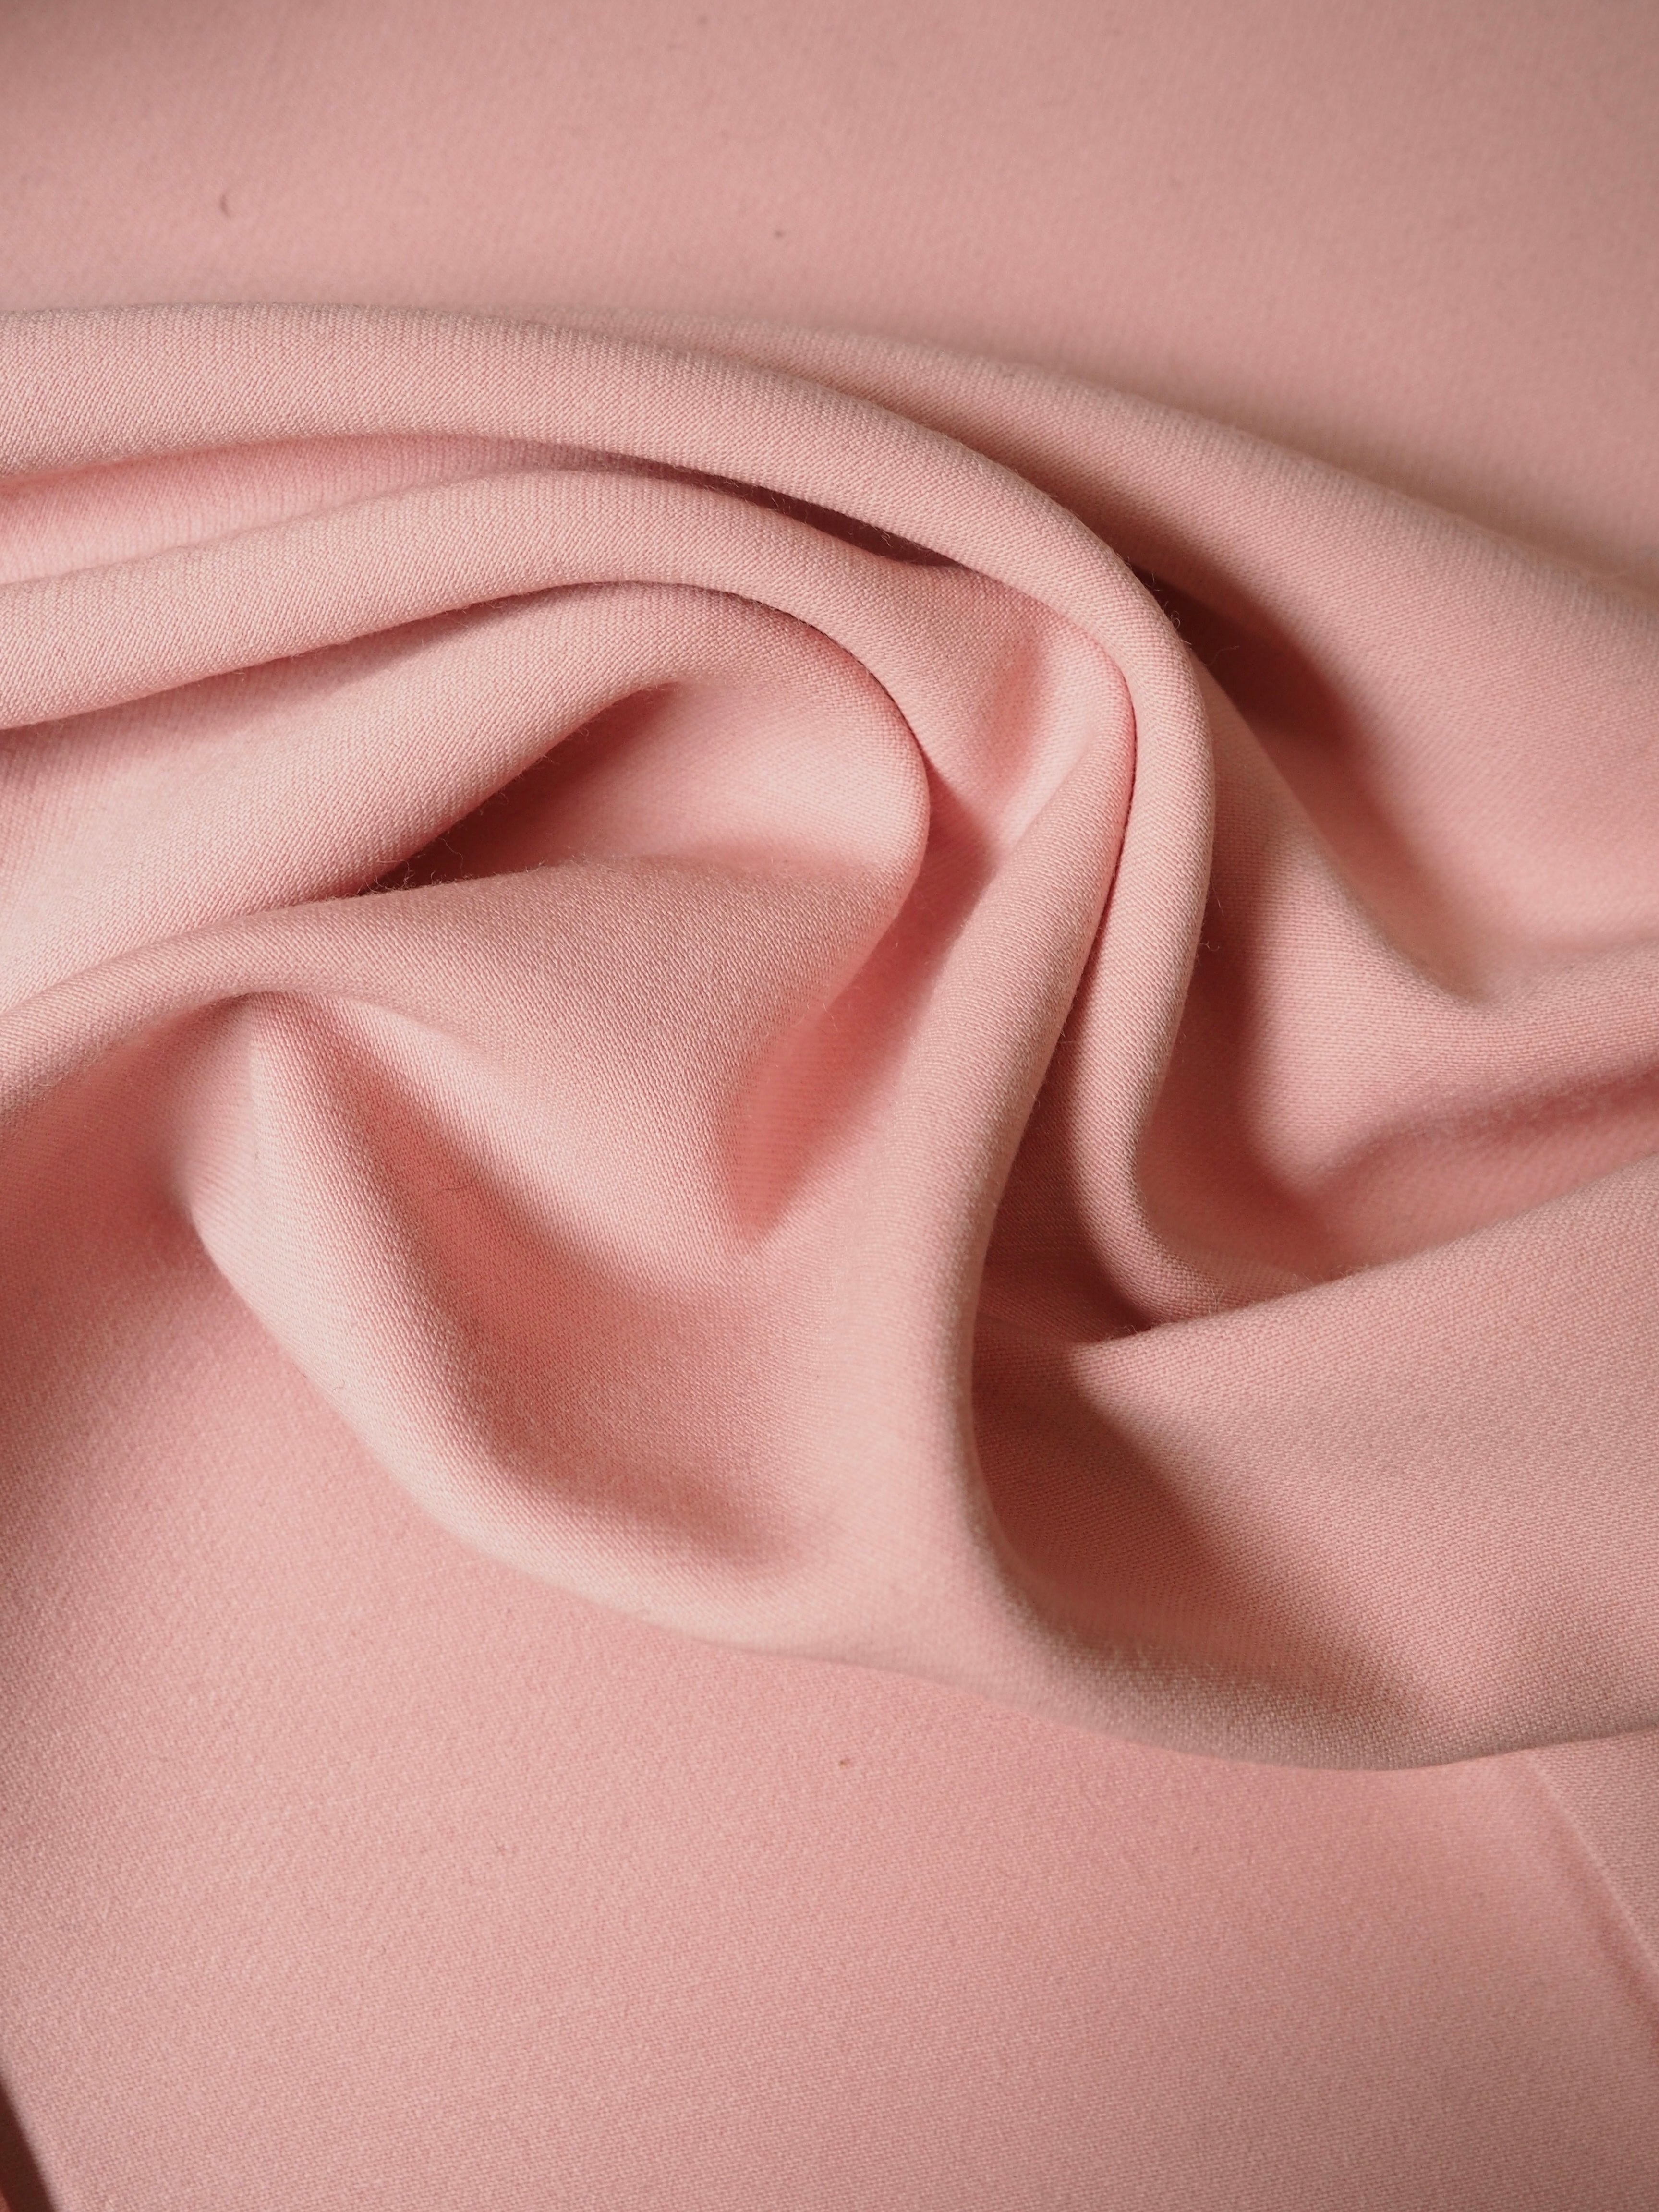 Boiled Wool Crepe - Soft Pale Pink 885